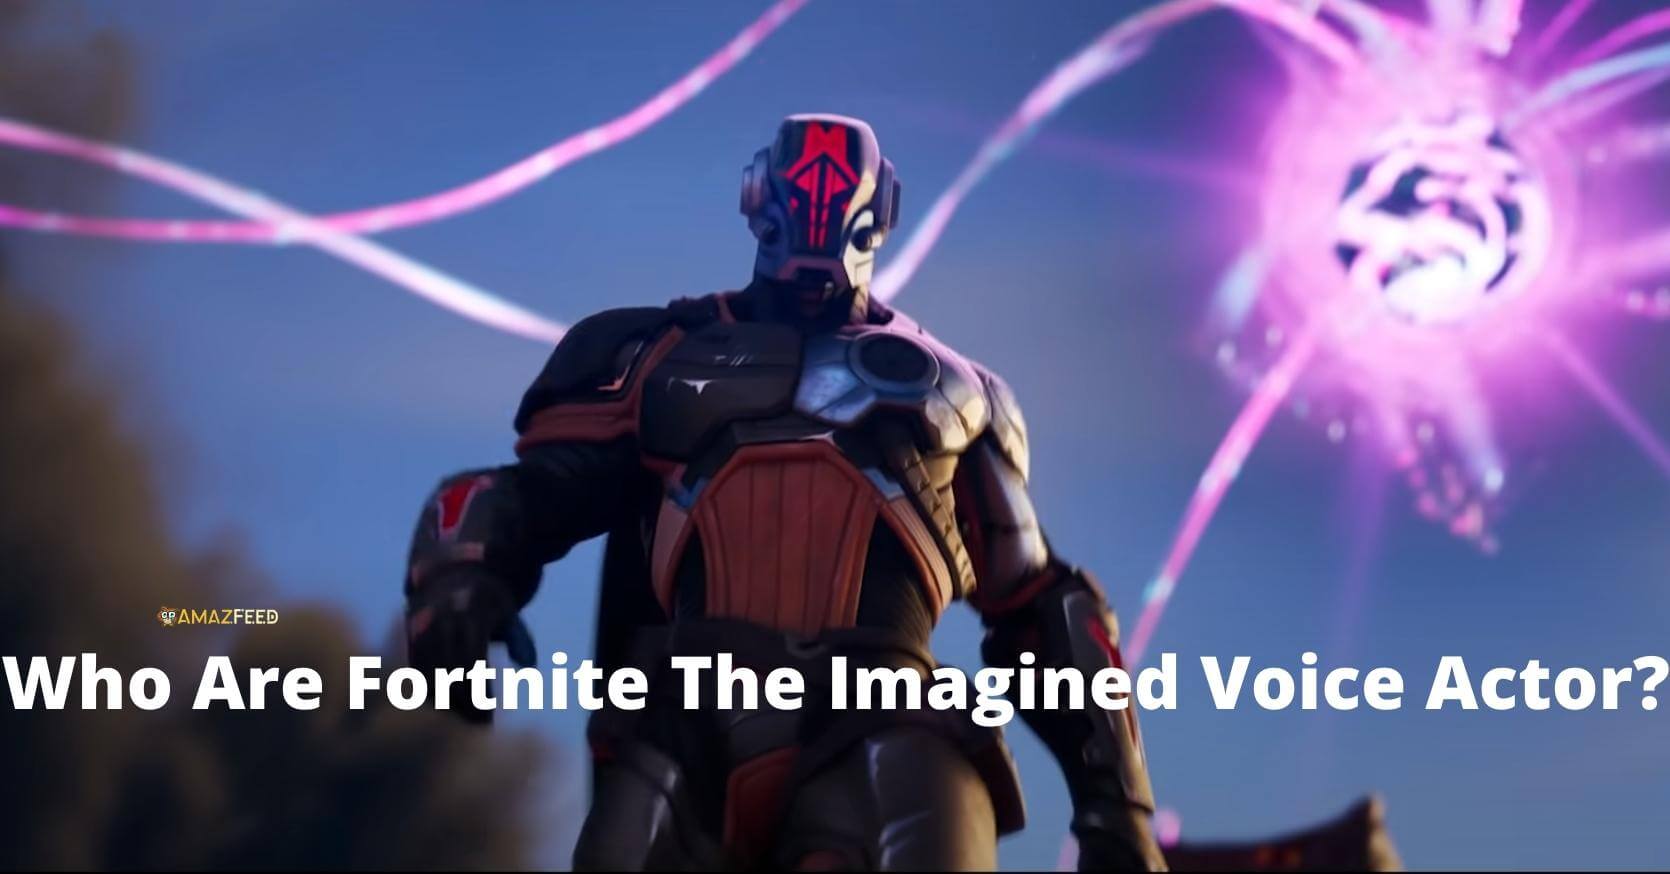 Who Are Fortnite The Imagined Voice Actor?